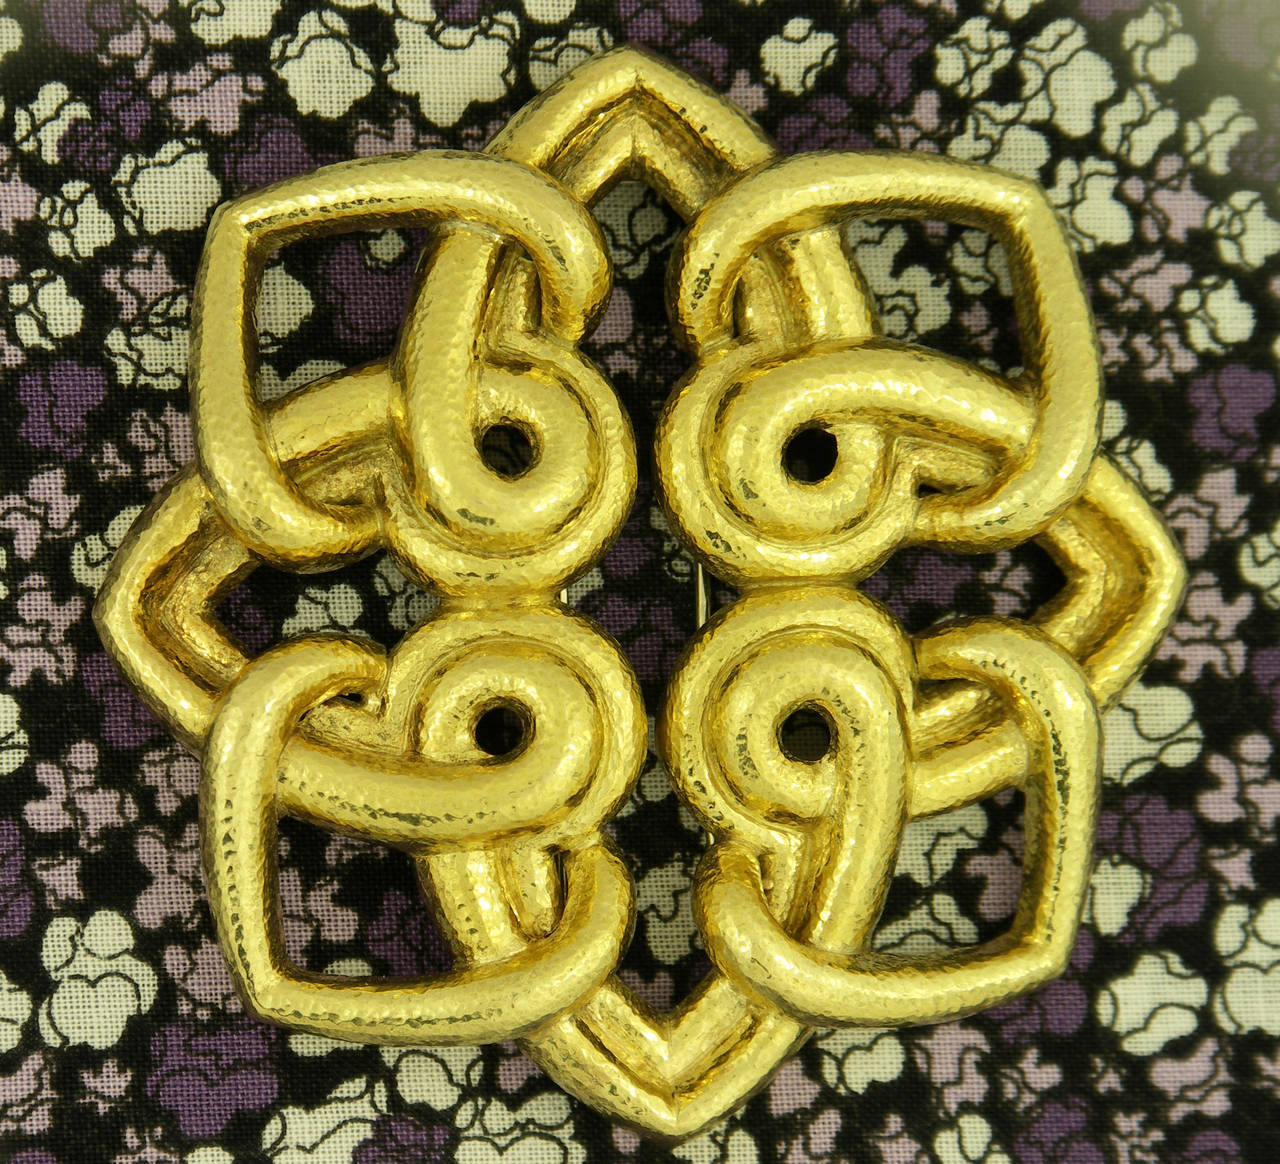 A Brooch by David Webb in 18K yellow gold, featuring an interlocking design, not unlike a snowflake. With eight points, this brooch measure three inches in diameter. The geometric design is accentuated by the beautiful hammered finish.